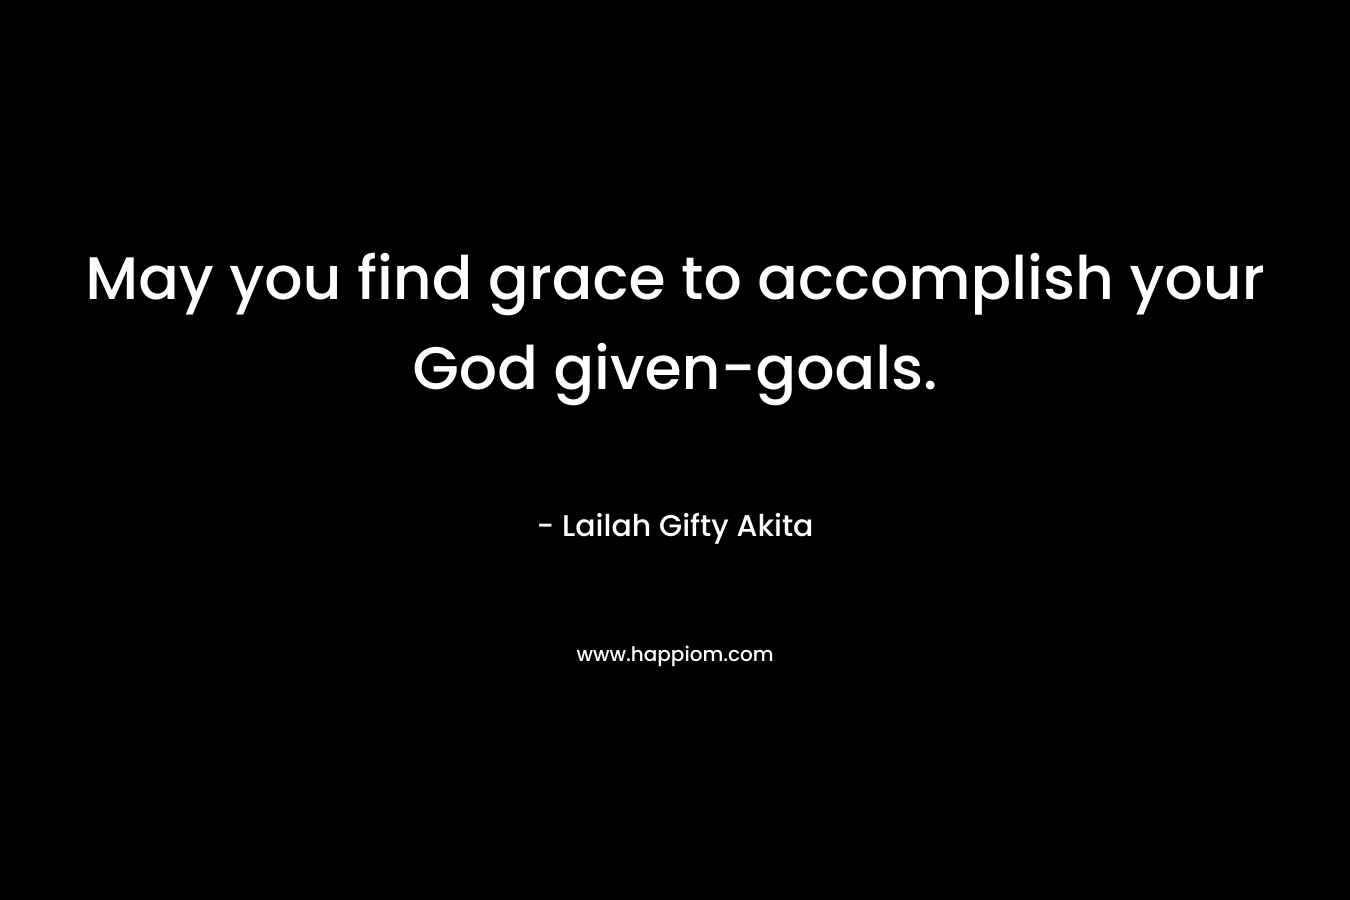 May you find grace to accomplish your God given-goals. – Lailah Gifty Akita